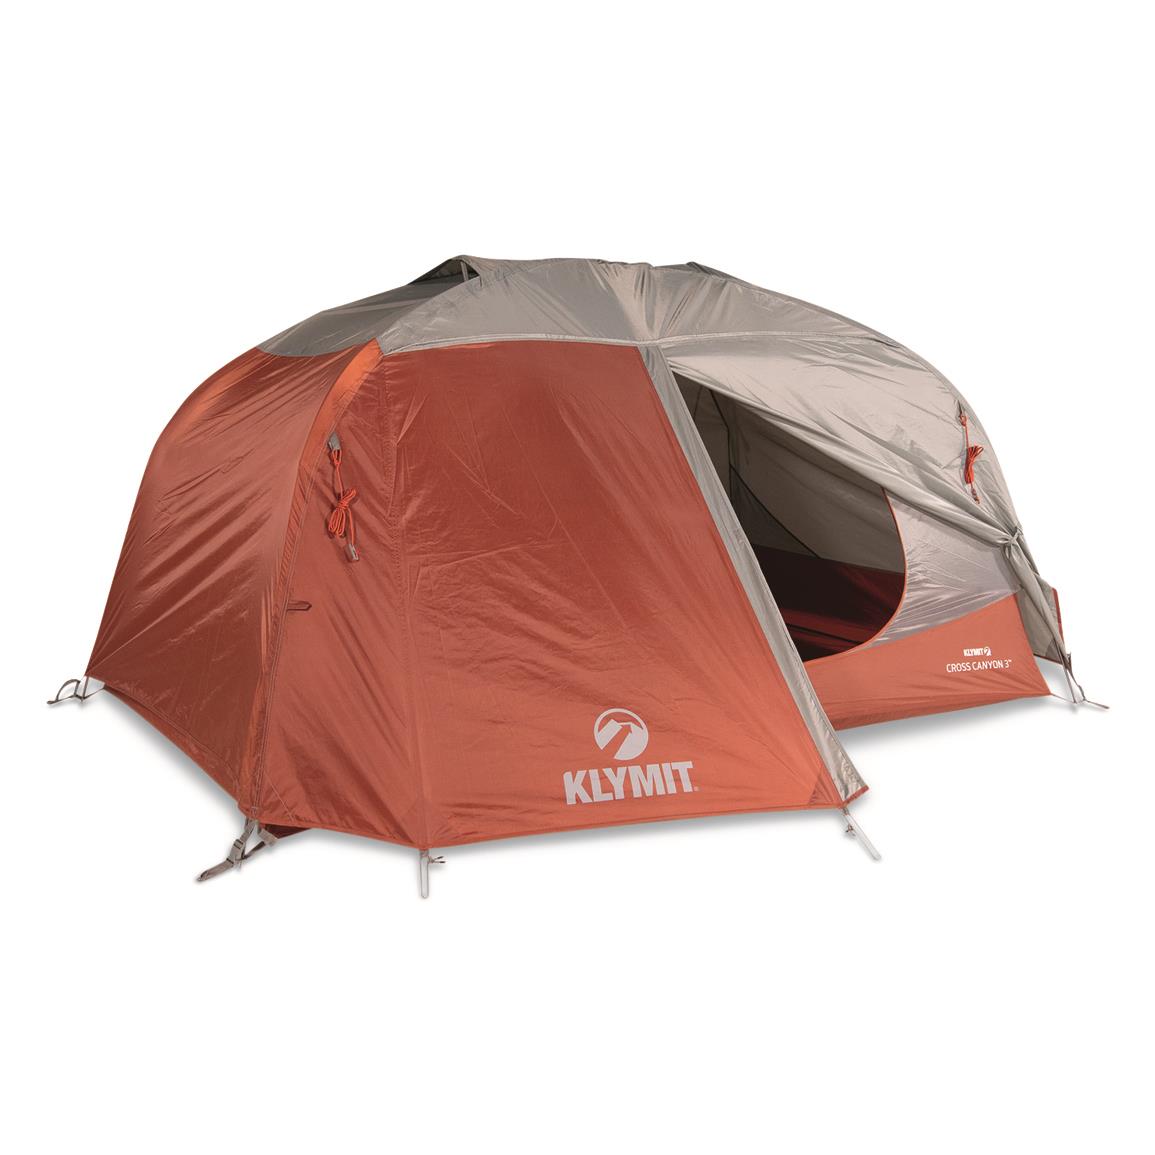 Klymit Cross Canyon 3-Person Tent, Red/Gray